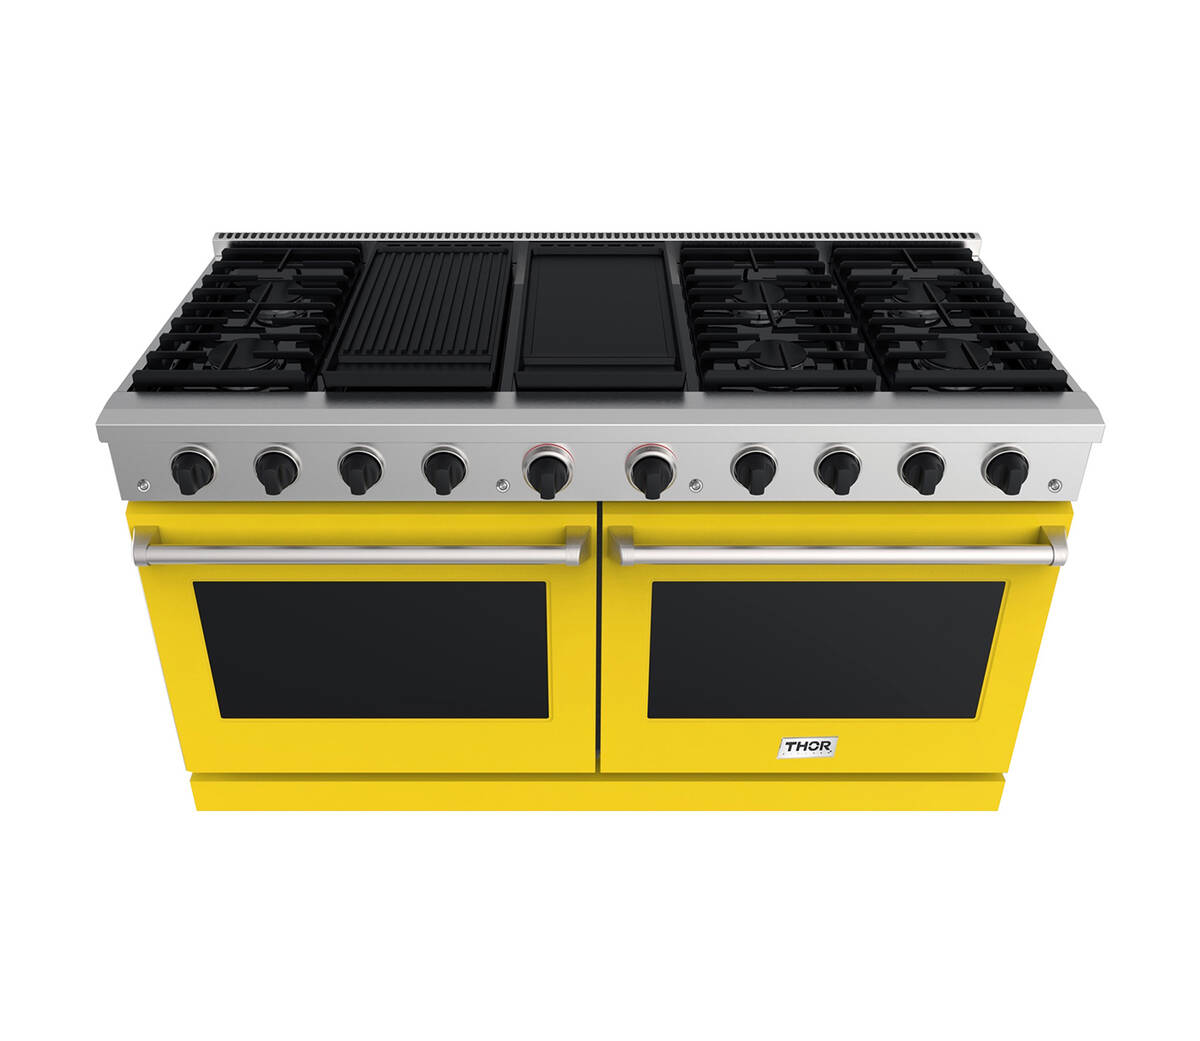 Thor Kitchen introduced its 60-Inch Professional Gas Range in striking yellow. (Thor Kitchen)